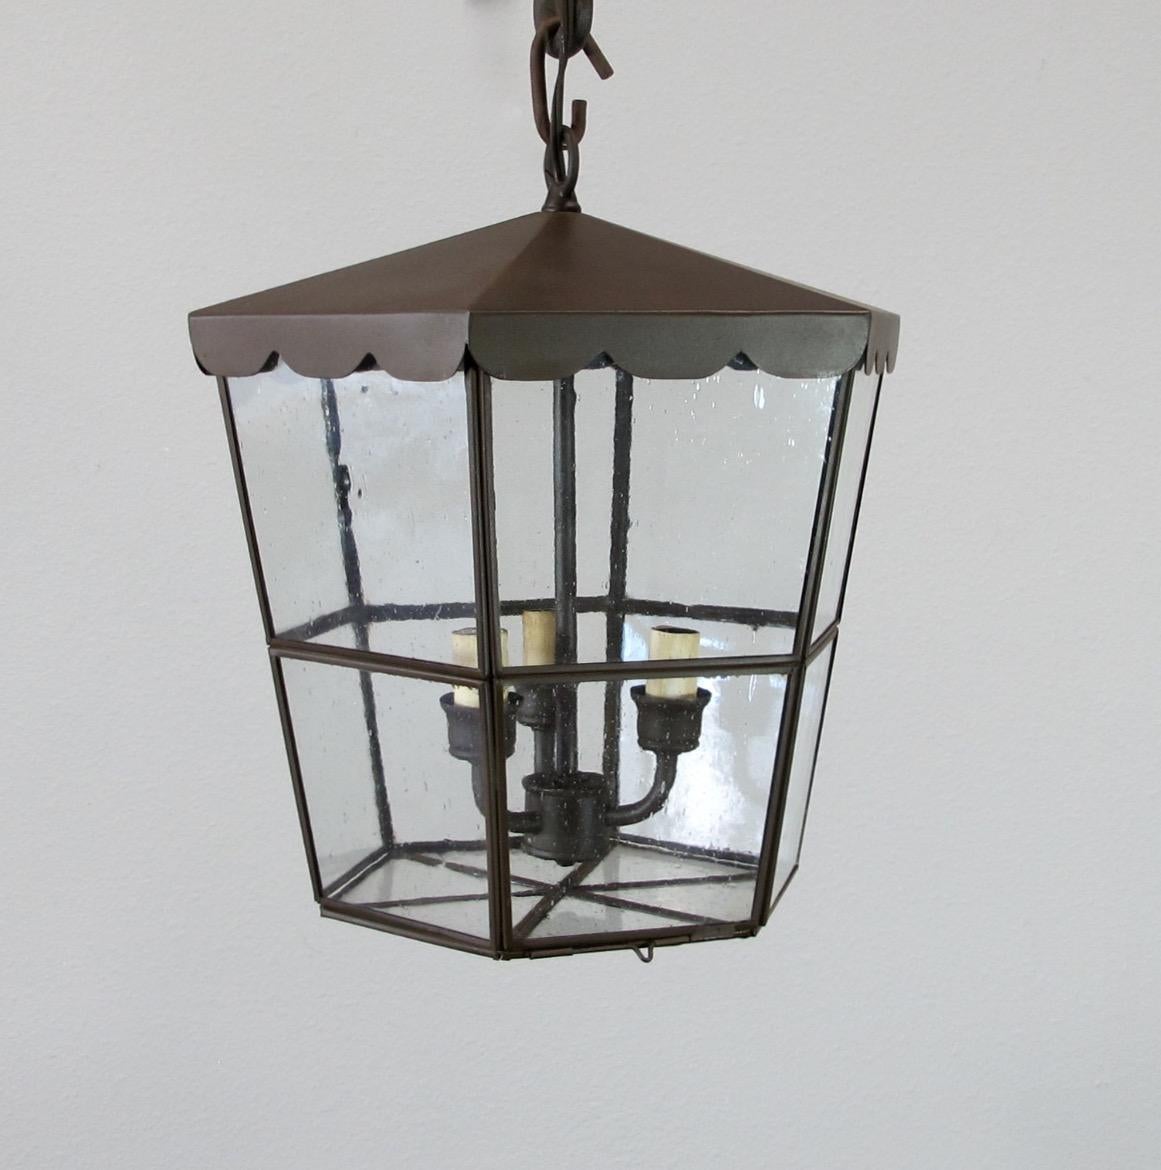 Part of the chandelier product line, the scalloped coast Lantern is perfect for interior or exterior use. Seeded glass with closed bottom for easy access to replace bulbs. 3 candelabra base bulbs up to 60 watts or socket. Chain and canopy included,